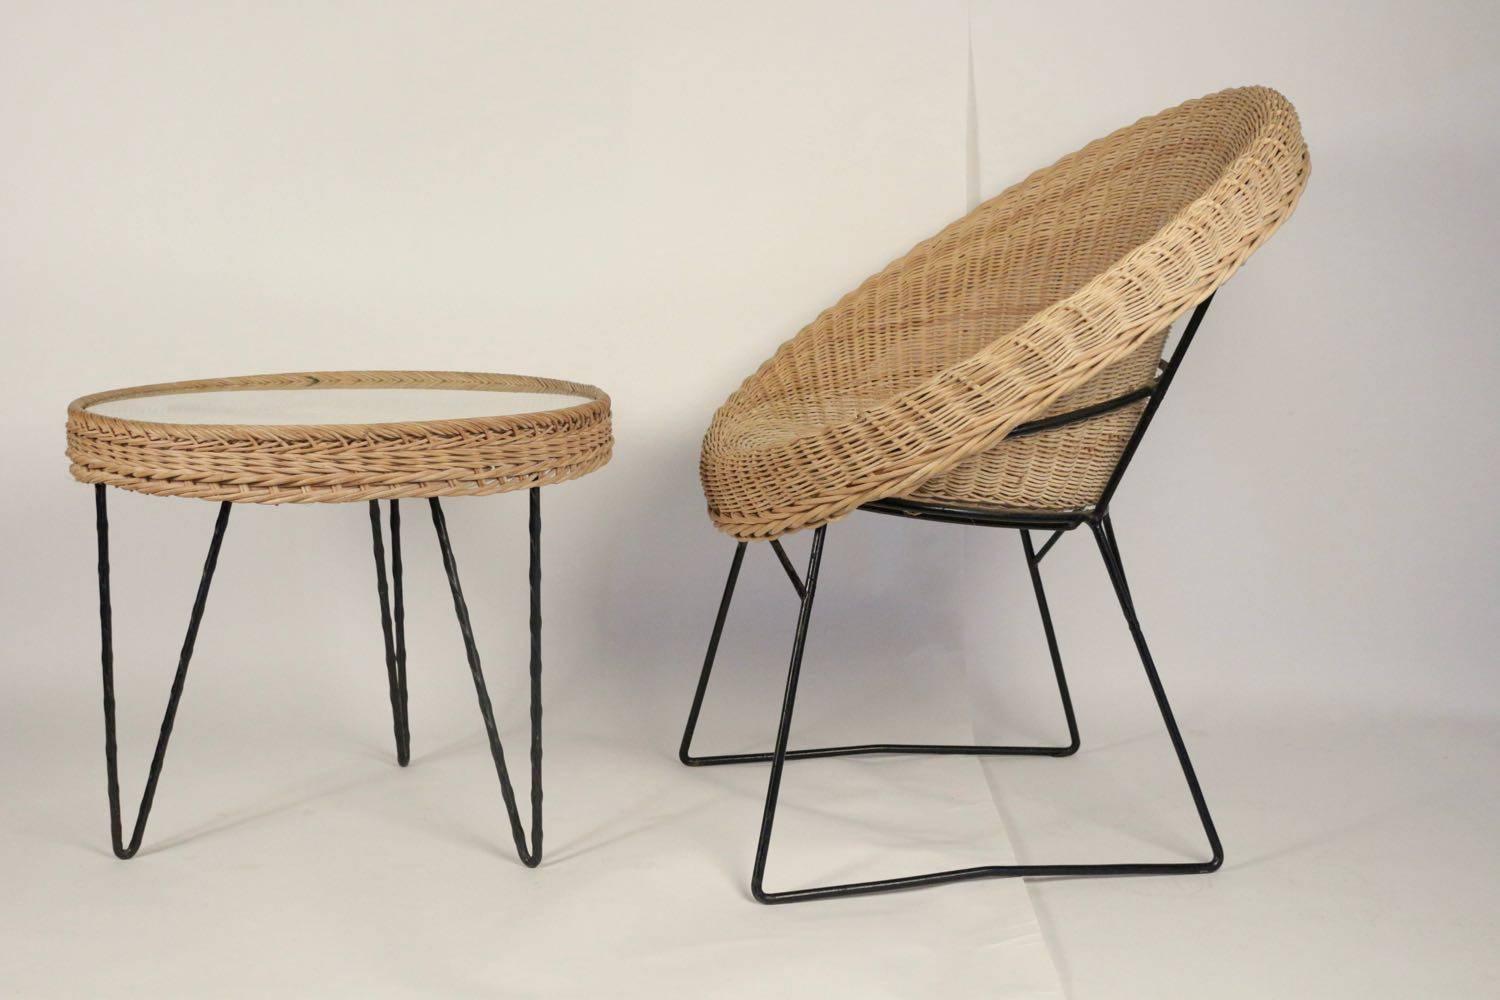 1950s rattan lounge set attributed to Mathieu Matzot.
Consisting of four wicker chairs, with conical removable shell, the black iron rod legs nicely emphasizes the structure.
One coffee table, with a rattan tray protected by a glass frame, graphic